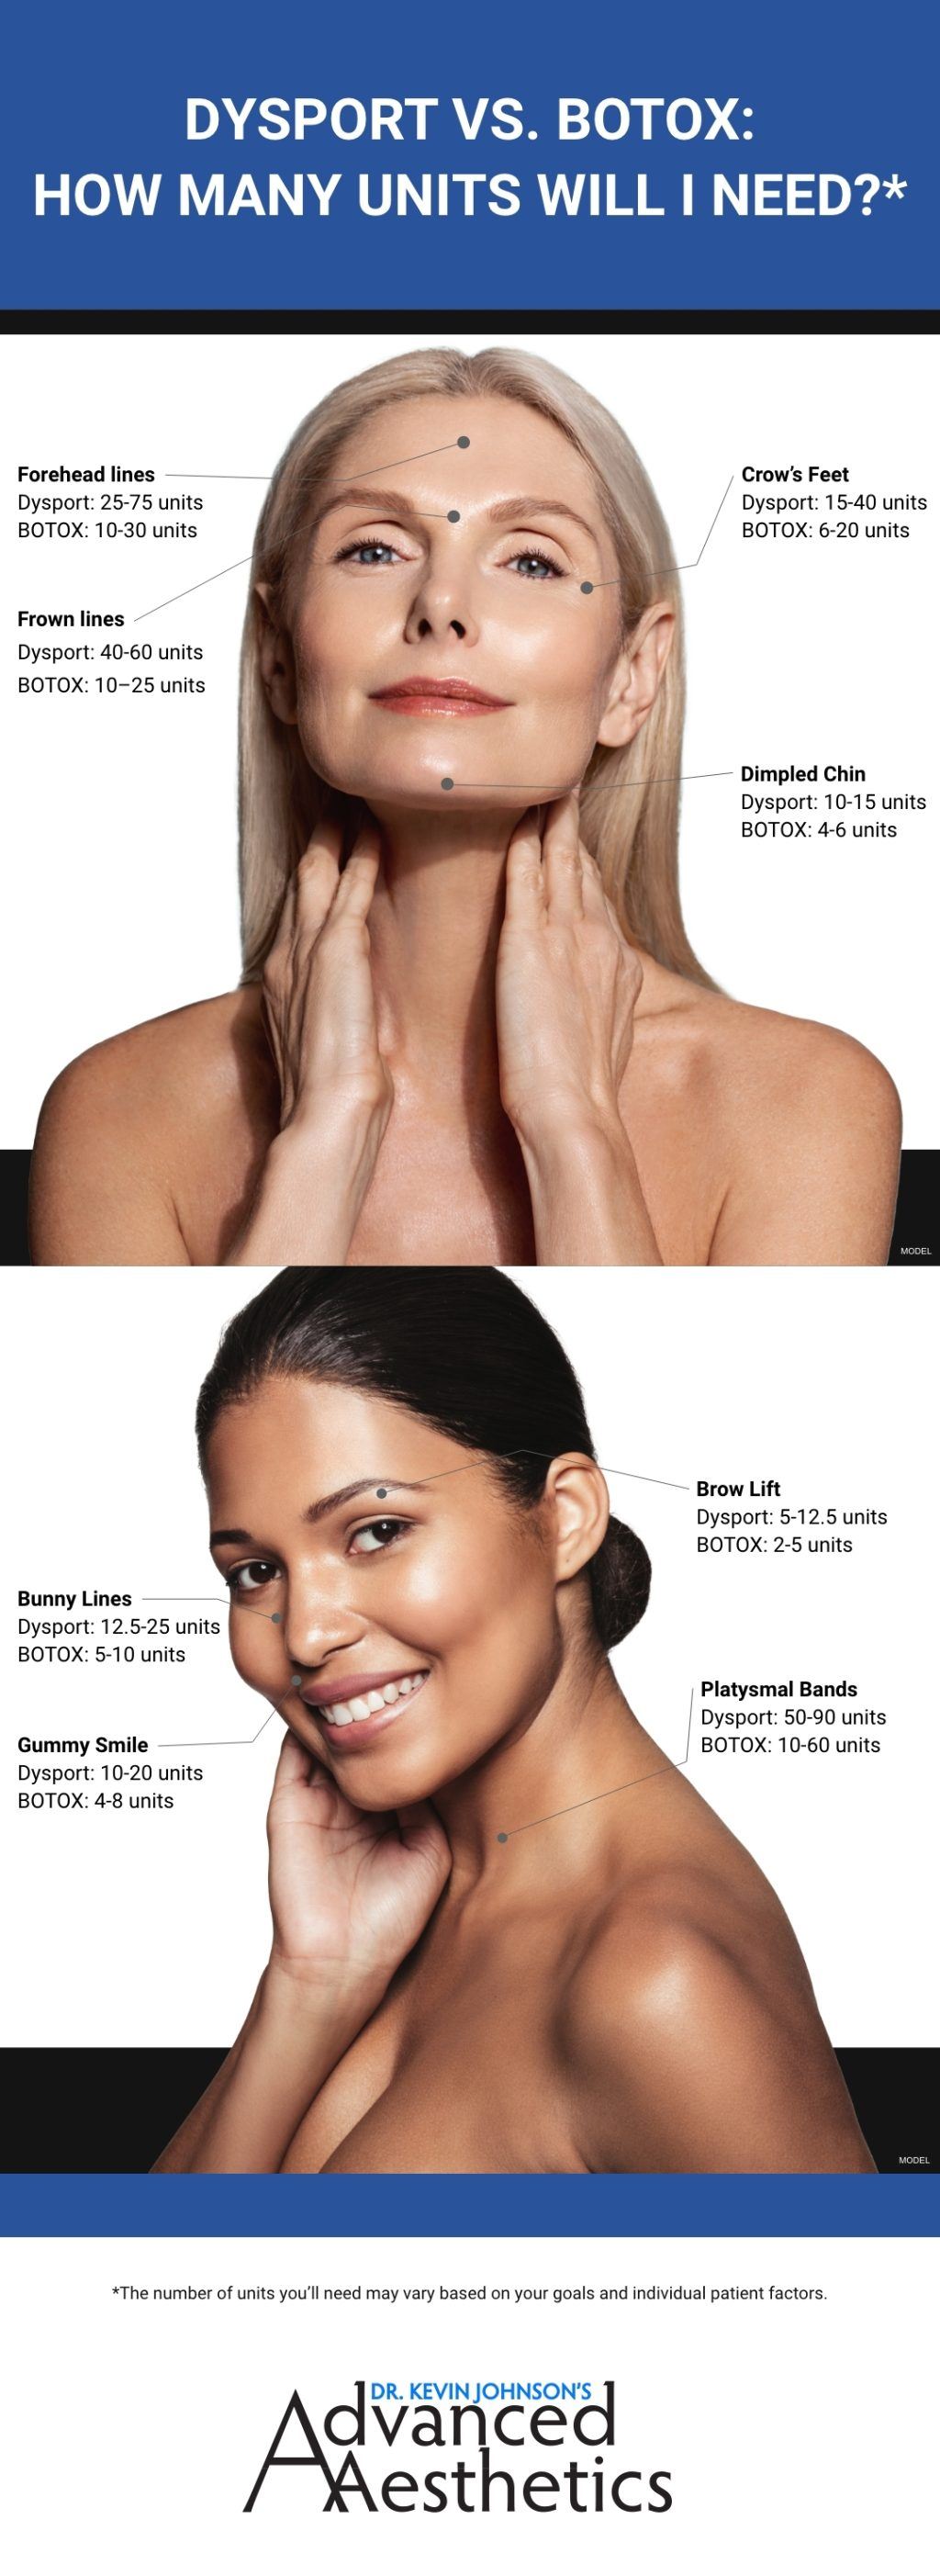 DYSPORT VS. BOTOX:
HOW MANY UNITS WILL I NEED?*

Two women (models) are shown with different points on the face, outlining the treatment areas and unit dosage mentioned below.

Forehead lines
Dysport: 25-75 units
BOTOX: 10-30 units

Frown lines
Dysport: 40-60 units
BOTOX: 10-25 units

Bunny Lines
Dysport: 12.5-25 units
BOTOX: 5-10 units

Gummy Smile
Dysport: 10-20 units
BOTOX: 4-8 units

Crow's Feet
Dysport: 15-40 units
BOTOX: 6-20 units

Dimpled Chin
Dysport: 10-15 units
BOTOX: 4-6 units

Brow Lift
Dysport: 5-12.5 units
BOTOX: 2-5 units

Platysmal Bands
Dysport: 50-90 units
BOTOX: 10-60 units

*The number of units you'll need may vary based on your goals and individual patient factors.
